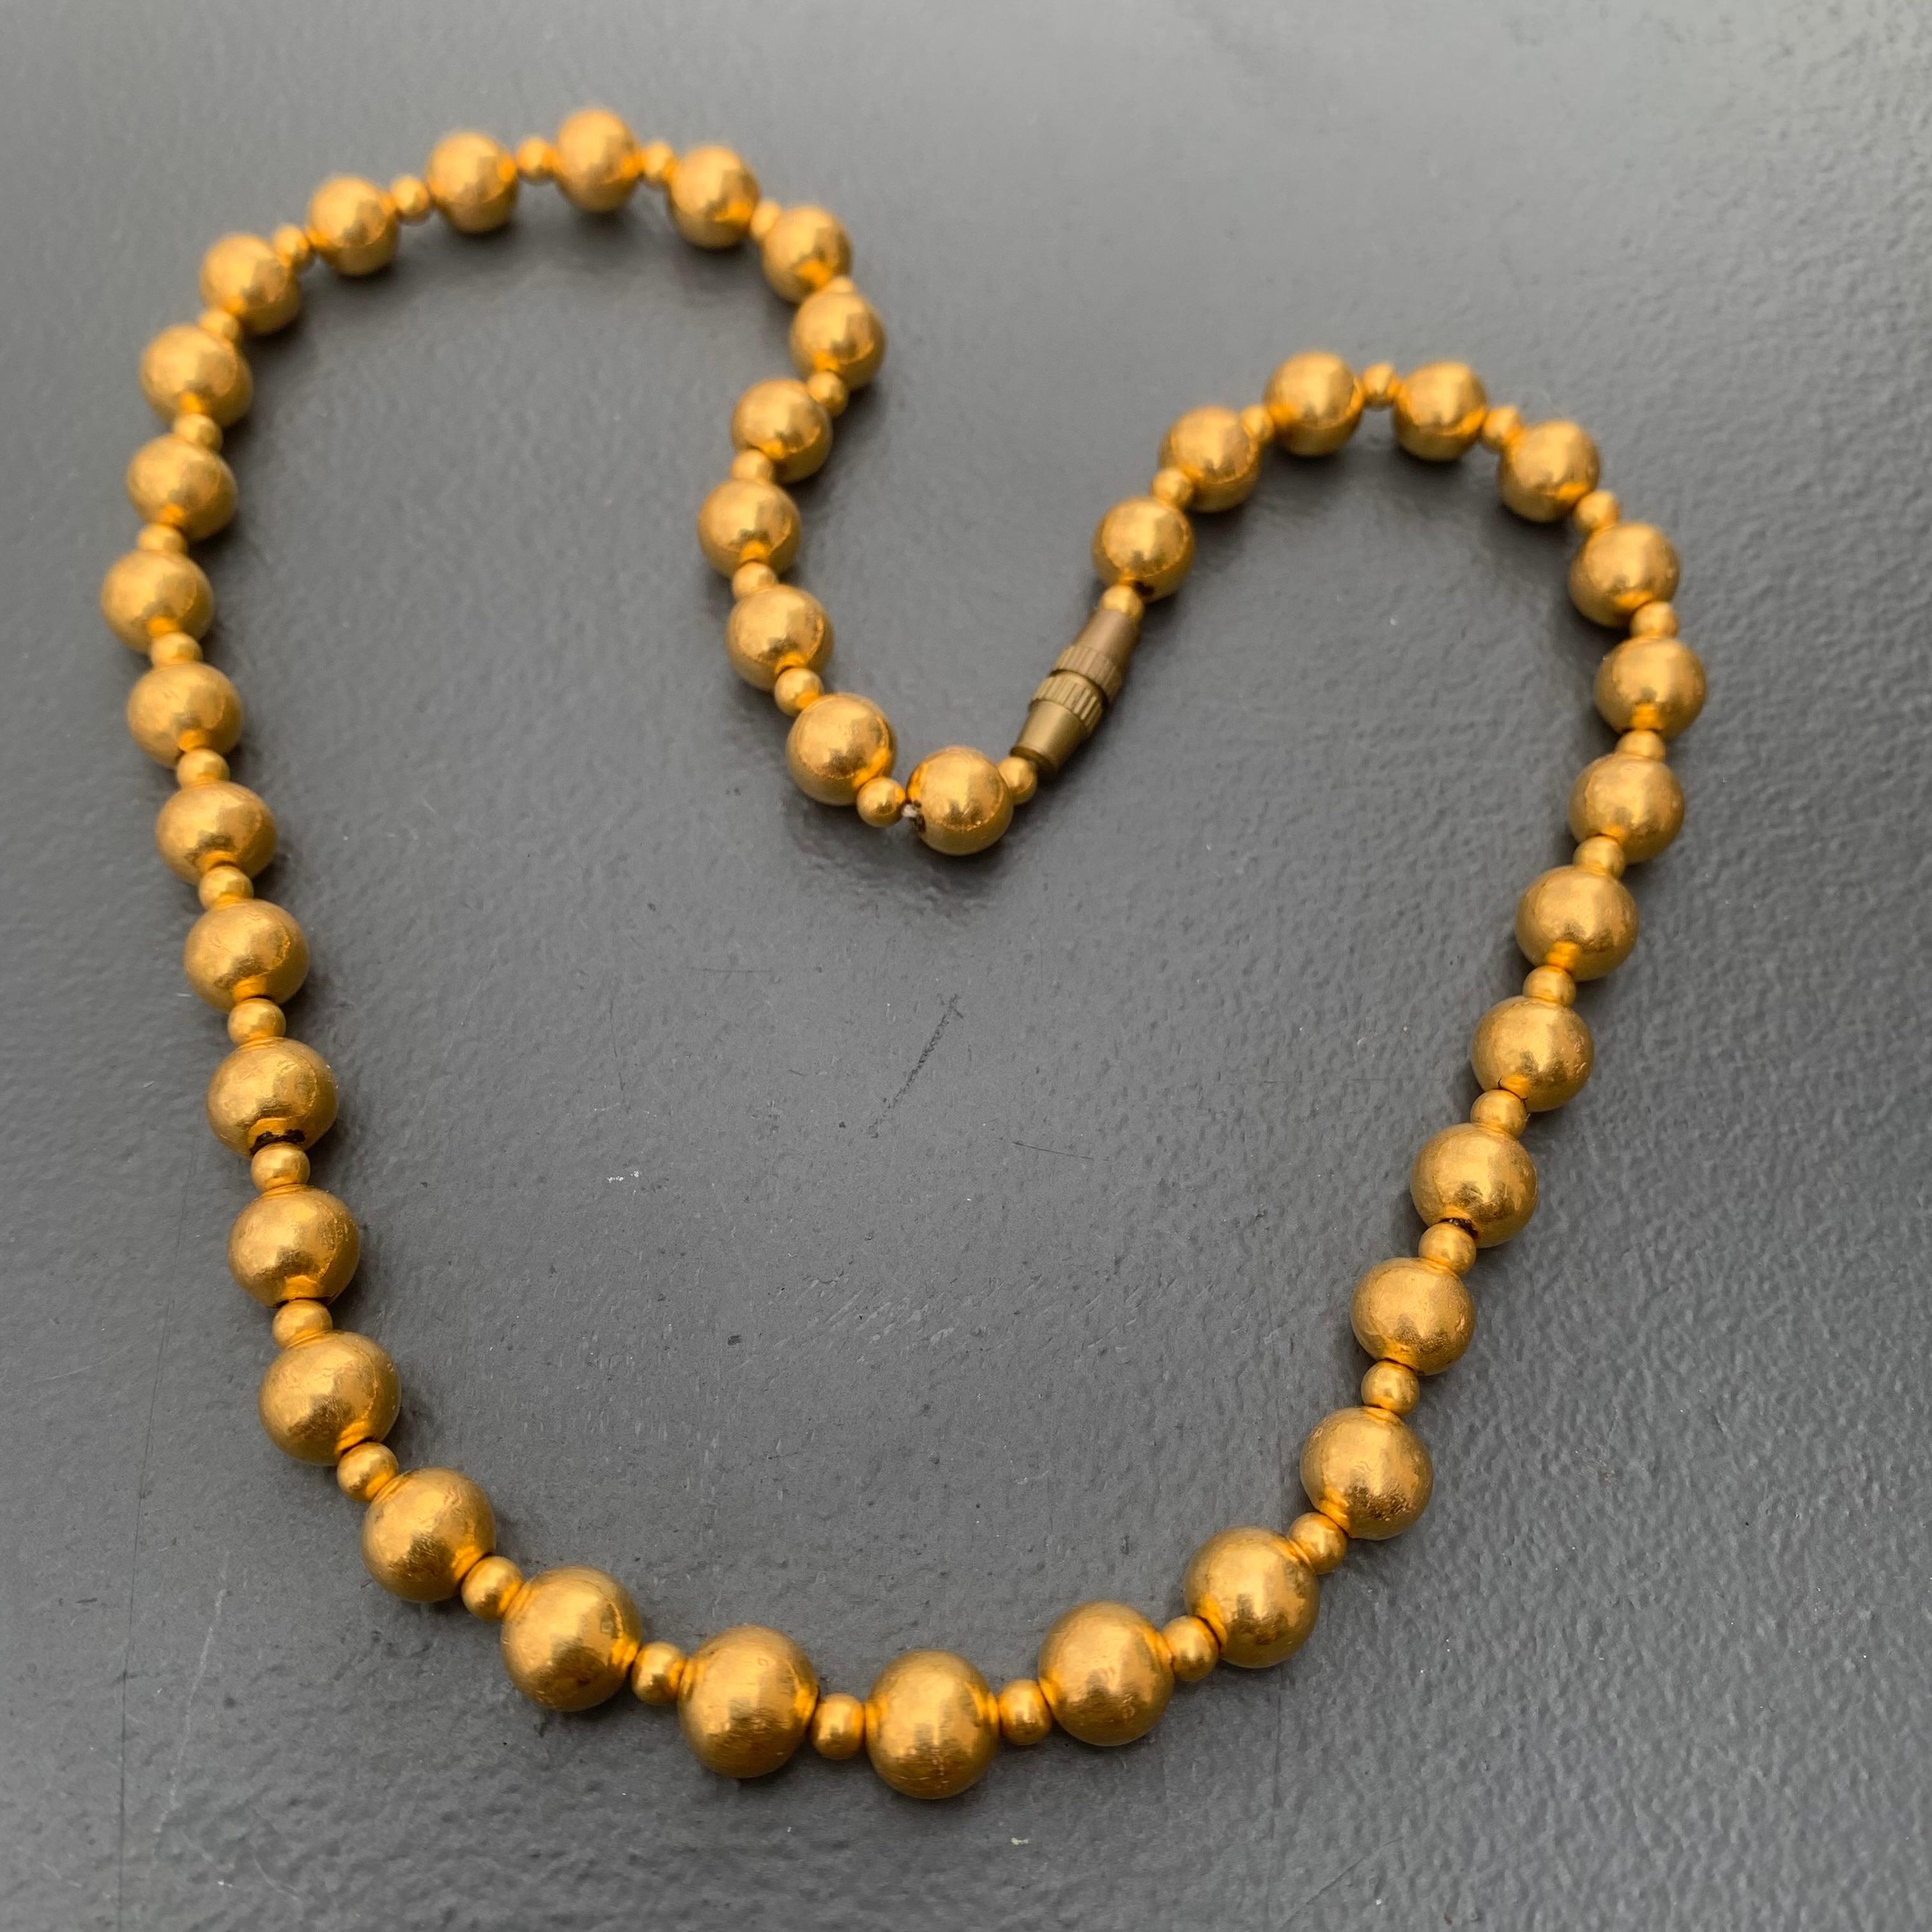 Vintage classic yellow 20kt wax filled round ball beaded choker necklace . Necklace is hand made in India with two size of beads and barrel clasp (not gold made of brass ).
Each bead is made of think layer of gold foil with wax/lac inside . Its not